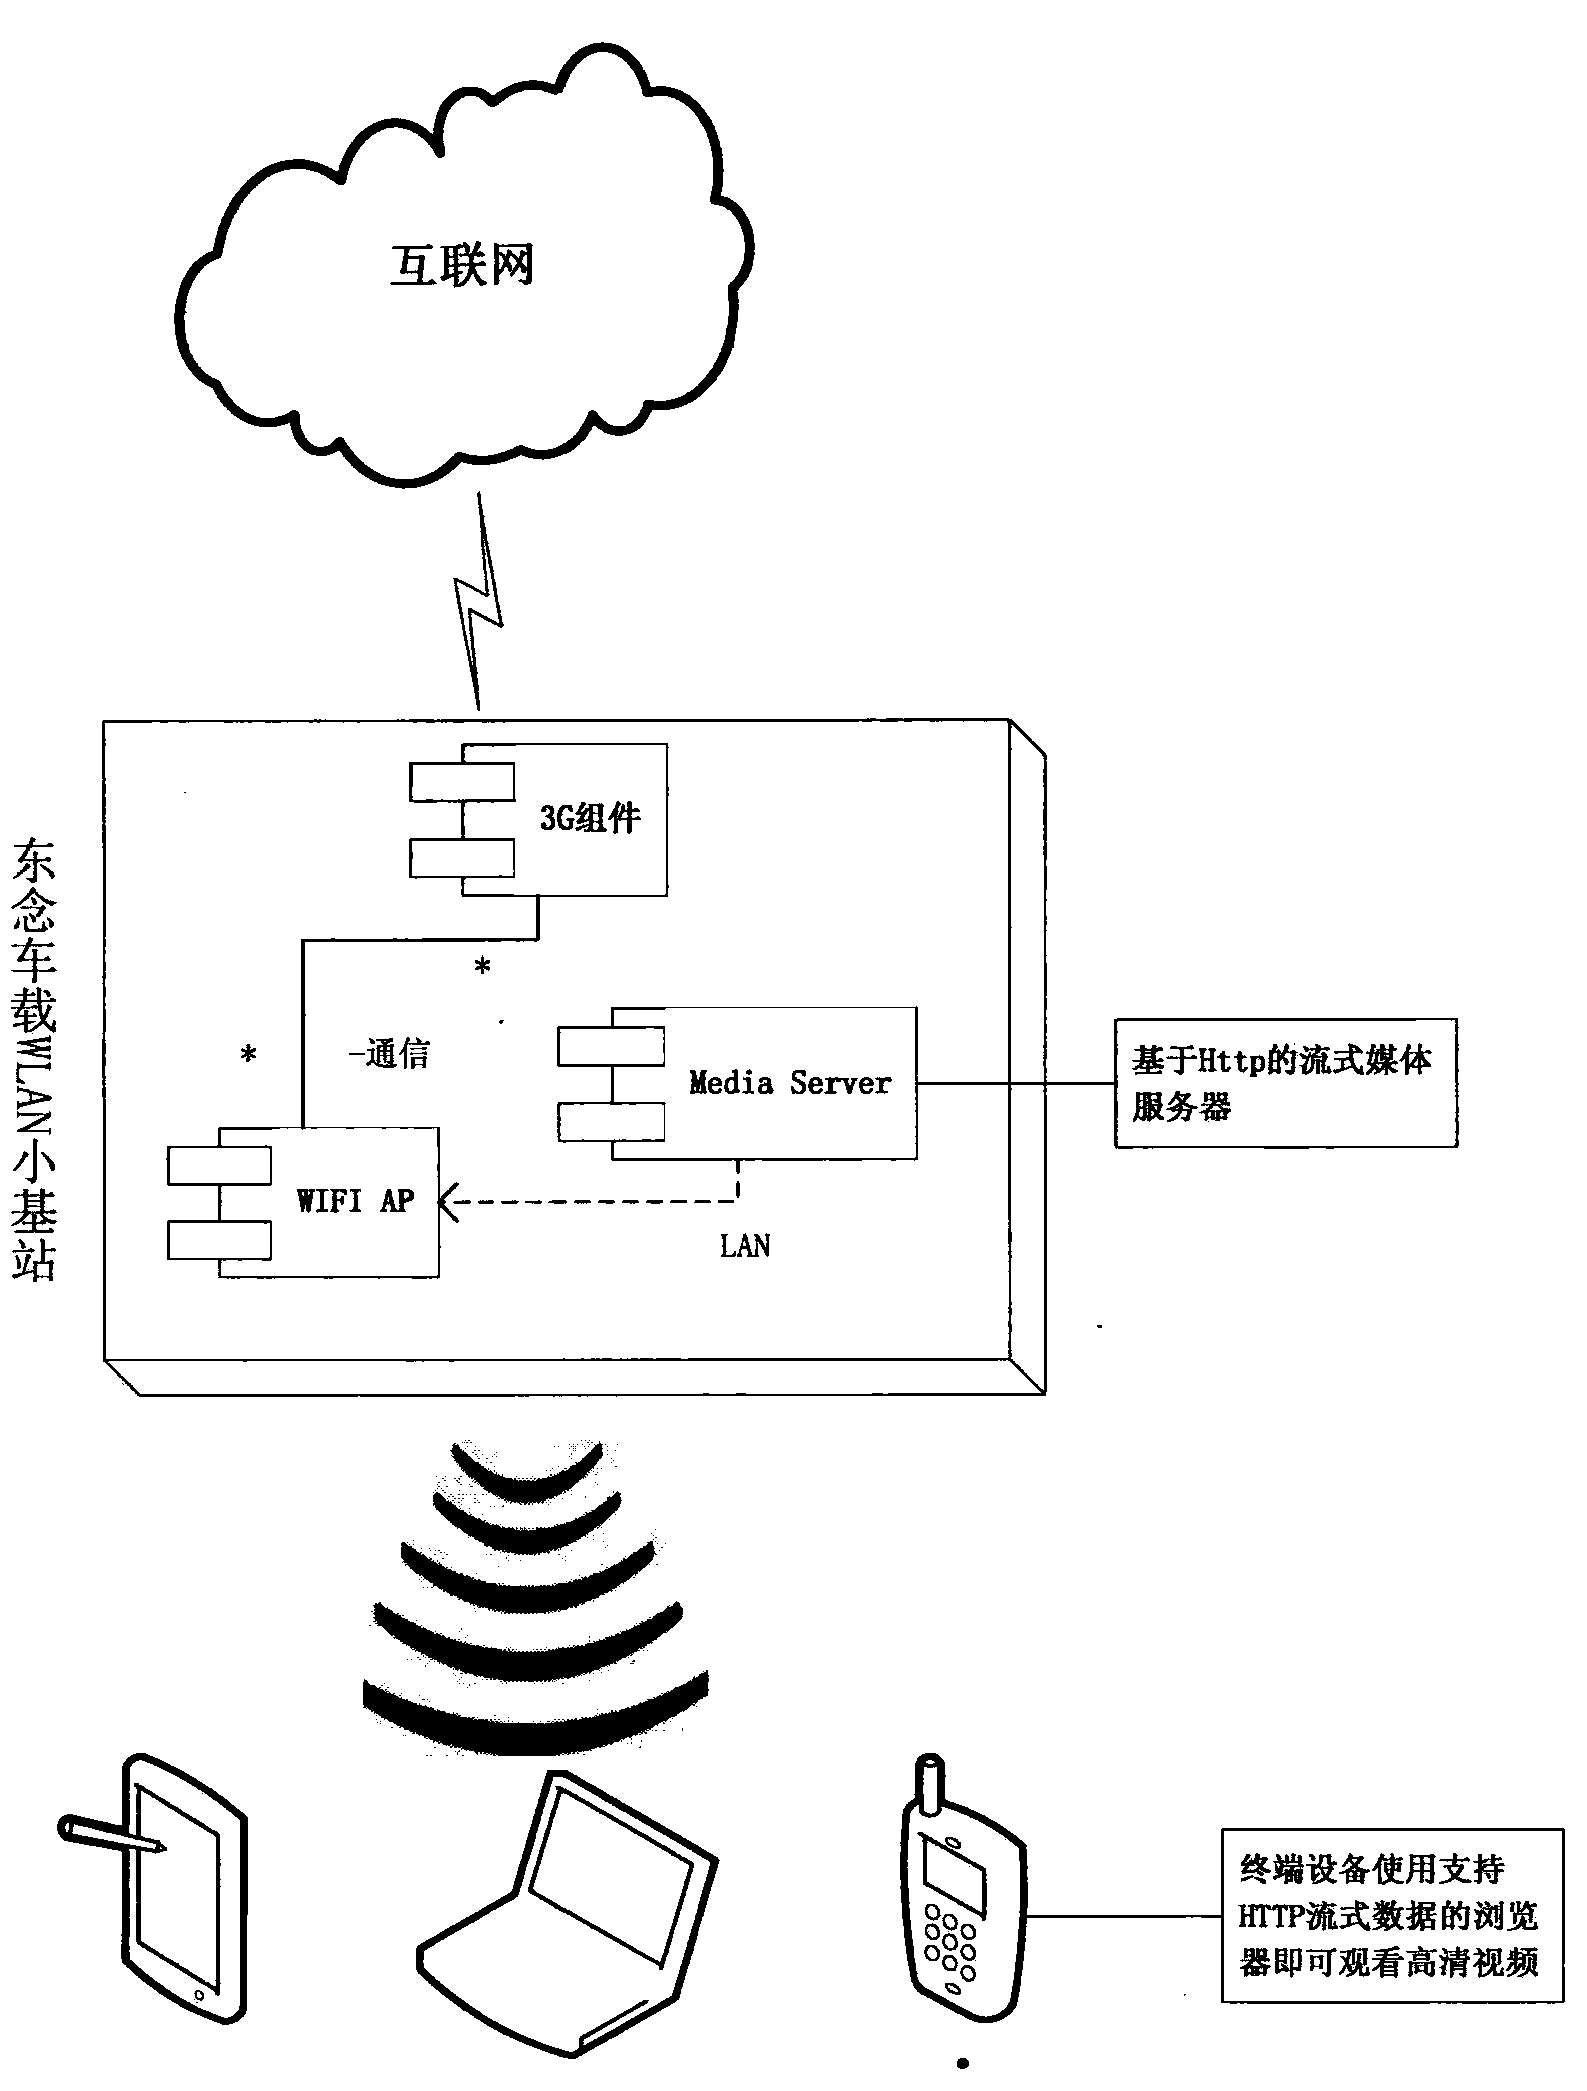 Network access system for public transportation